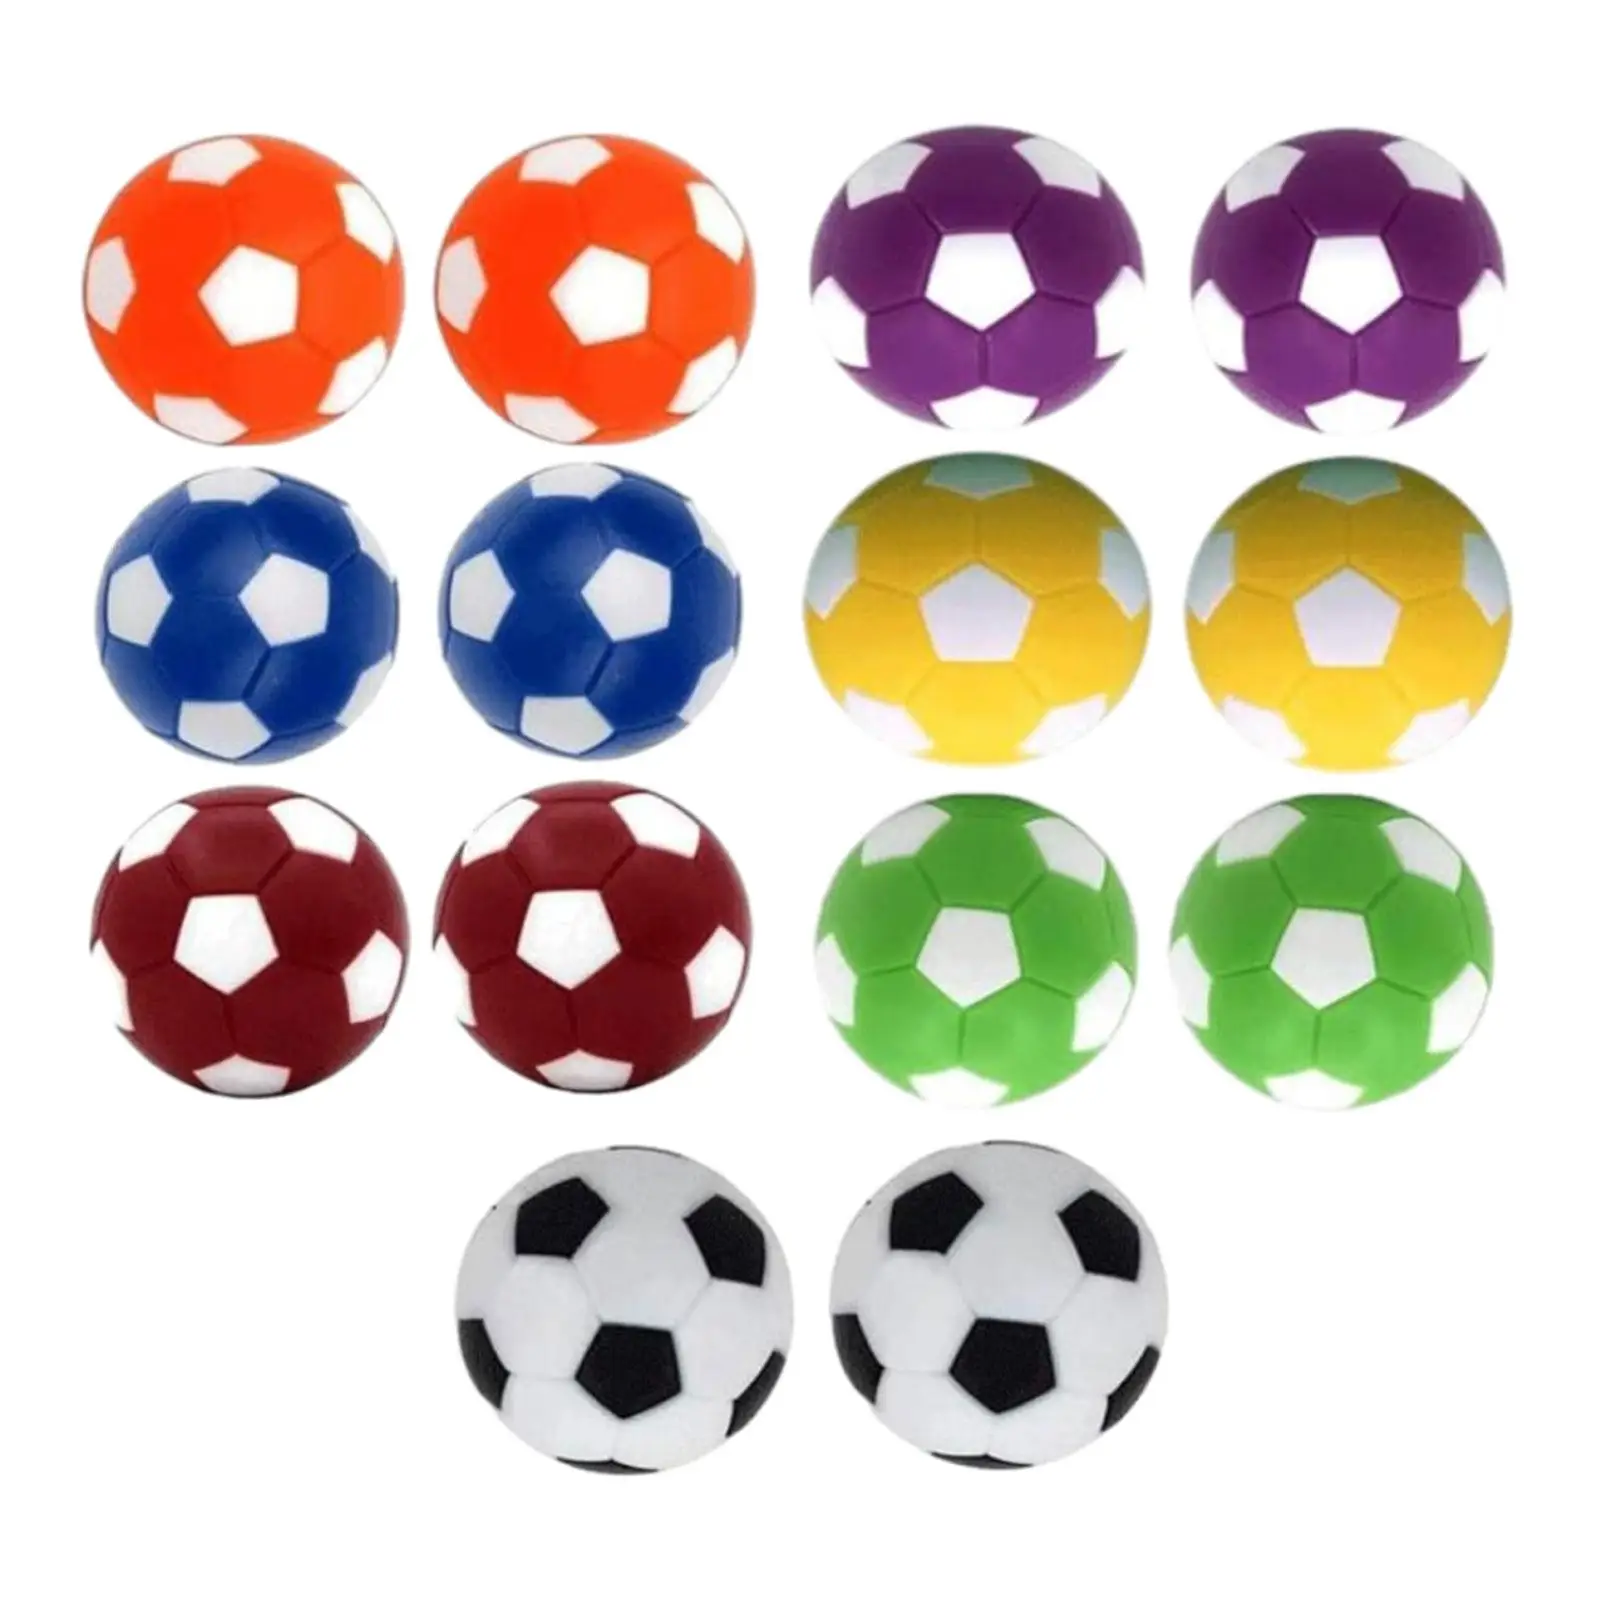 

14x Foosball Table Balls Official Table Top Soccer Balls 36mm for Party Games Family Game Finger Sport Match Toy Tabletop Game